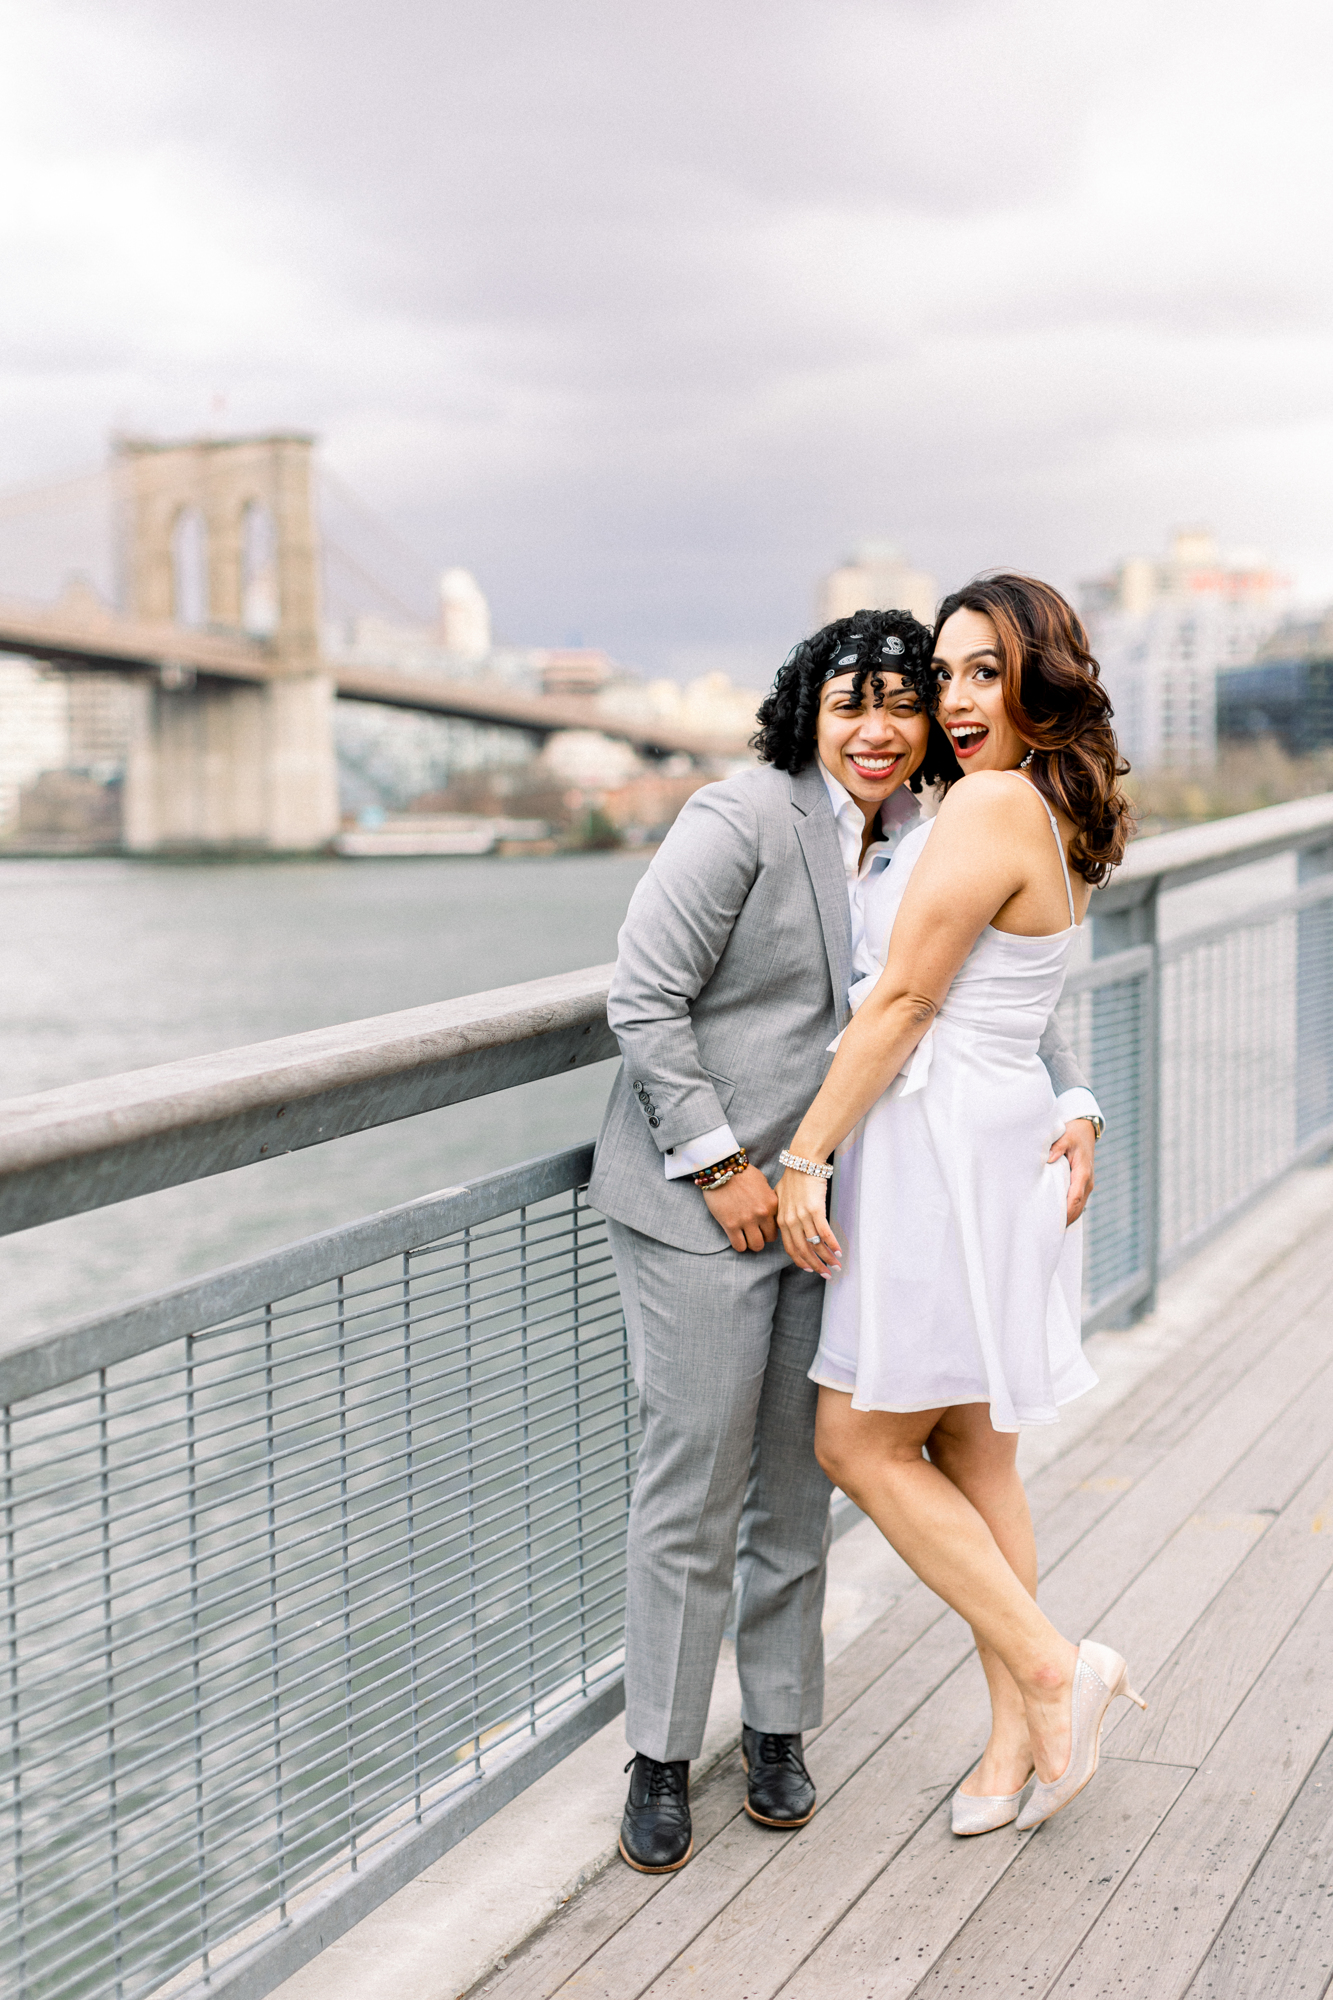 Cheerful South Street Seaport Engagement Photography